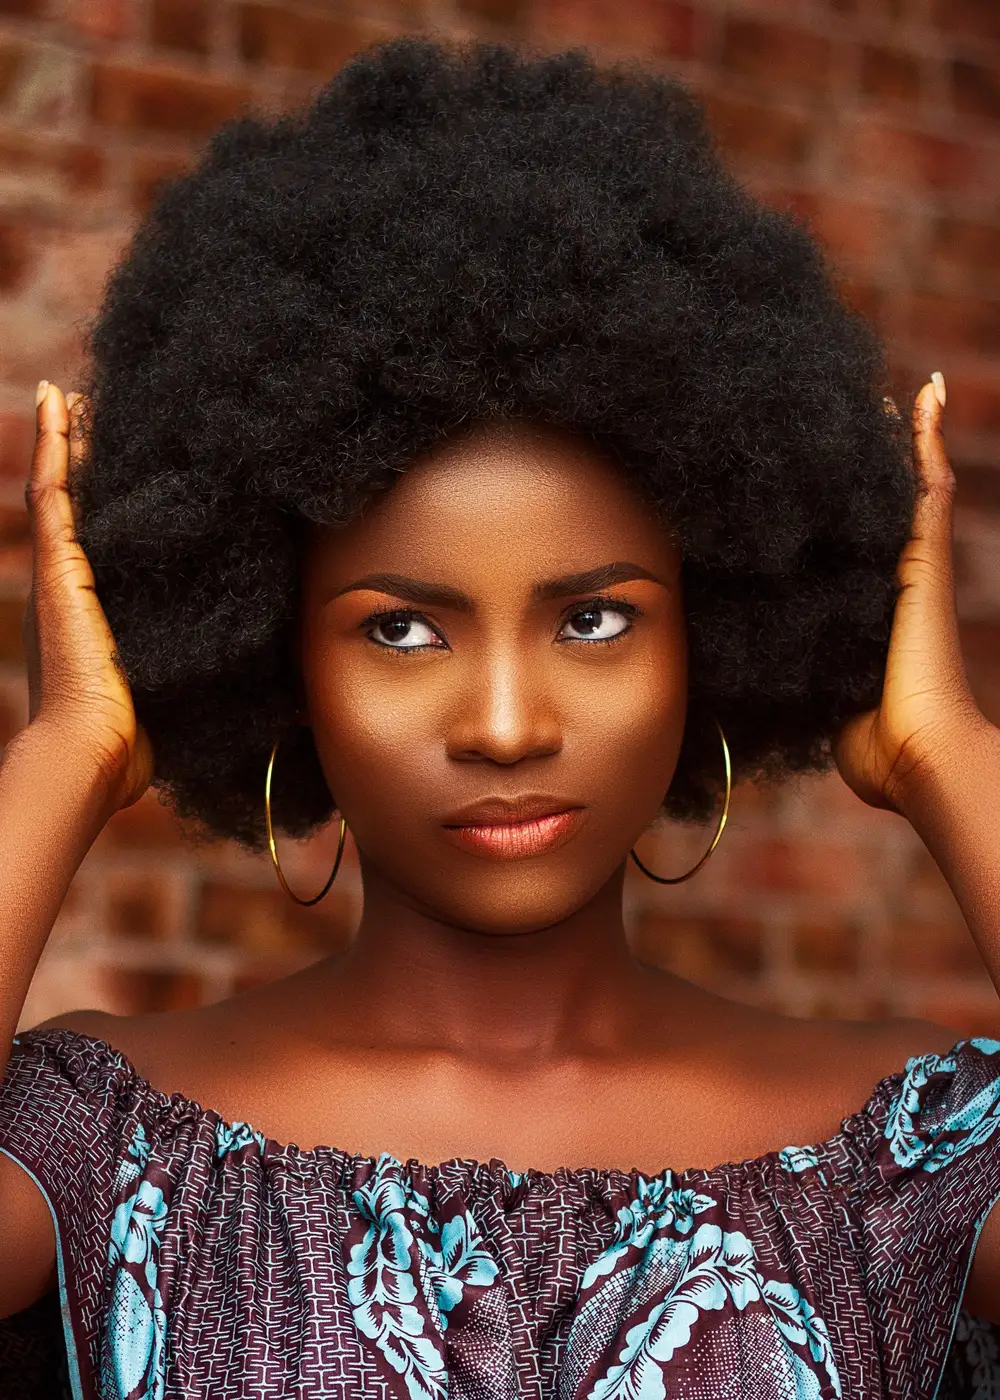 Lady holding her afro